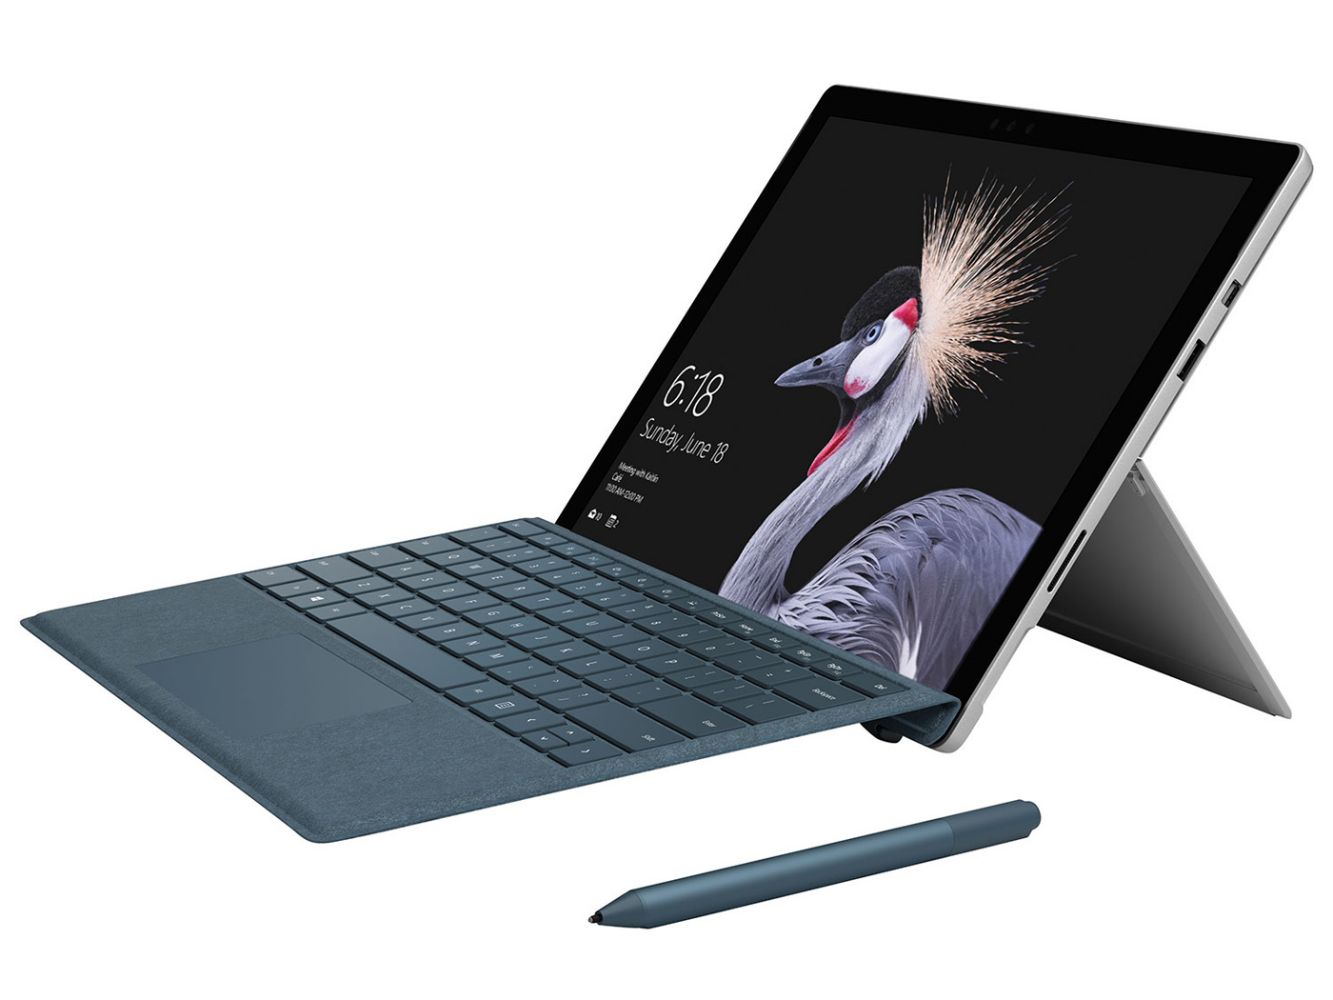 Microsoft Surface Pro 4, 5 and 6, HP Laptops and Dell Monitors